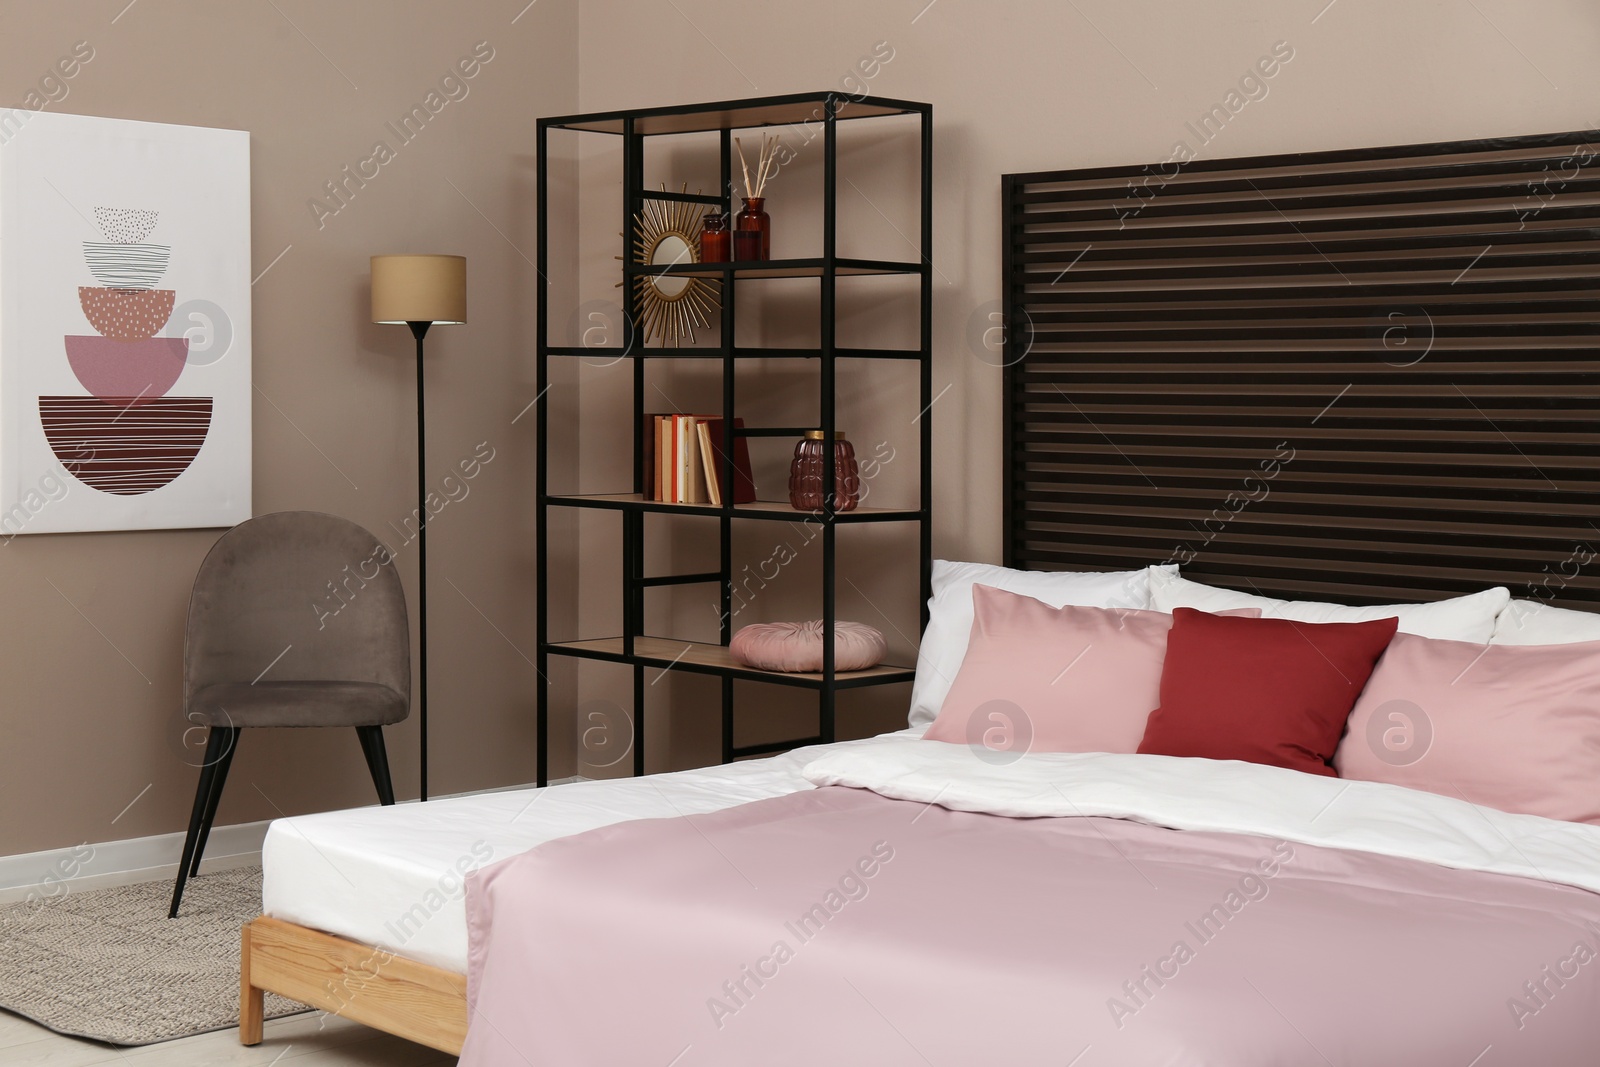 Photo of Large comfortable bed near beige wall in room. Interior design